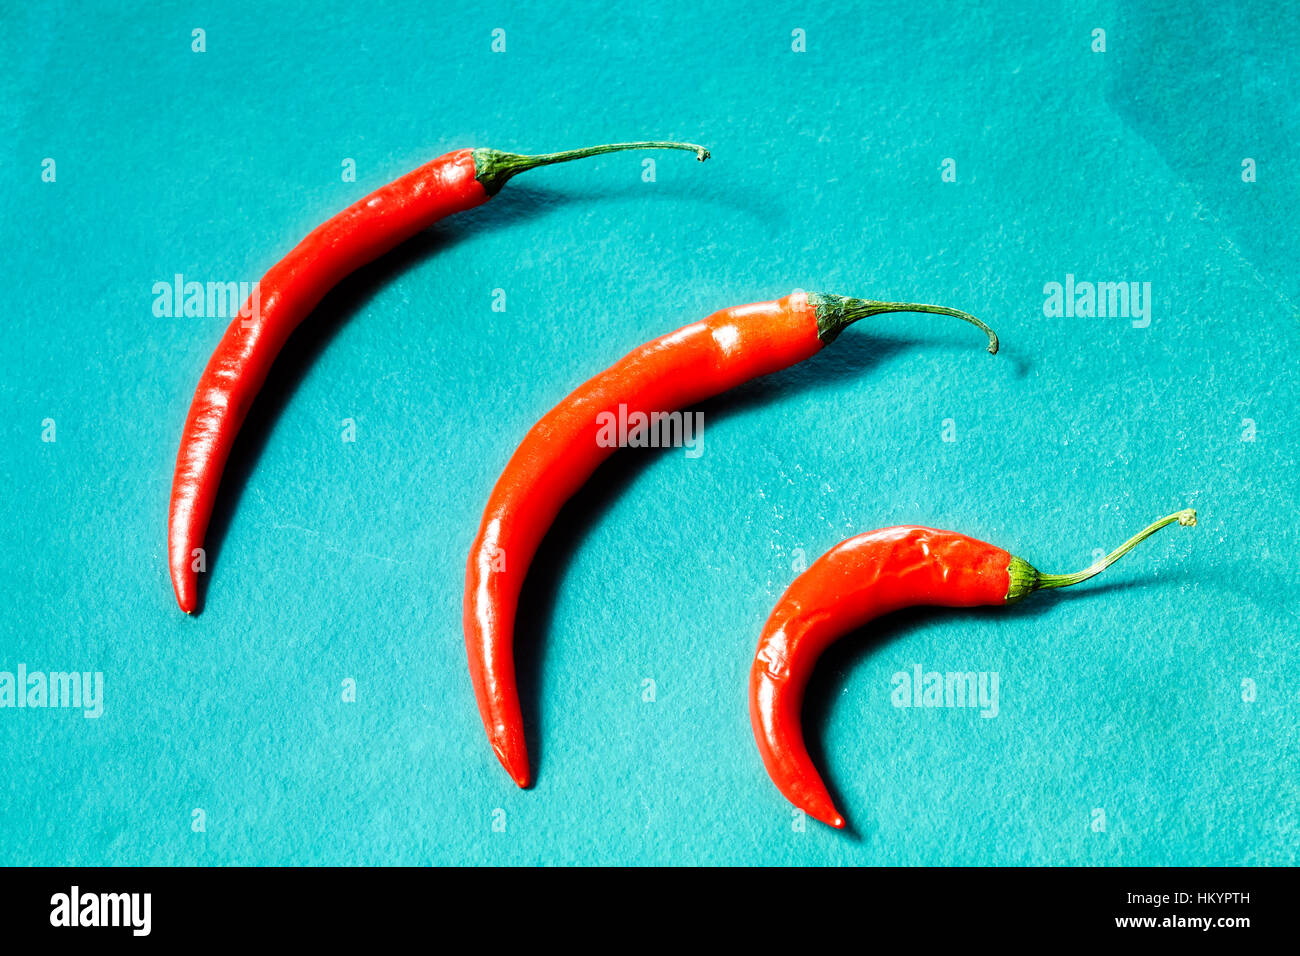 Red chili pepper on a blue slate background. Stock Photo